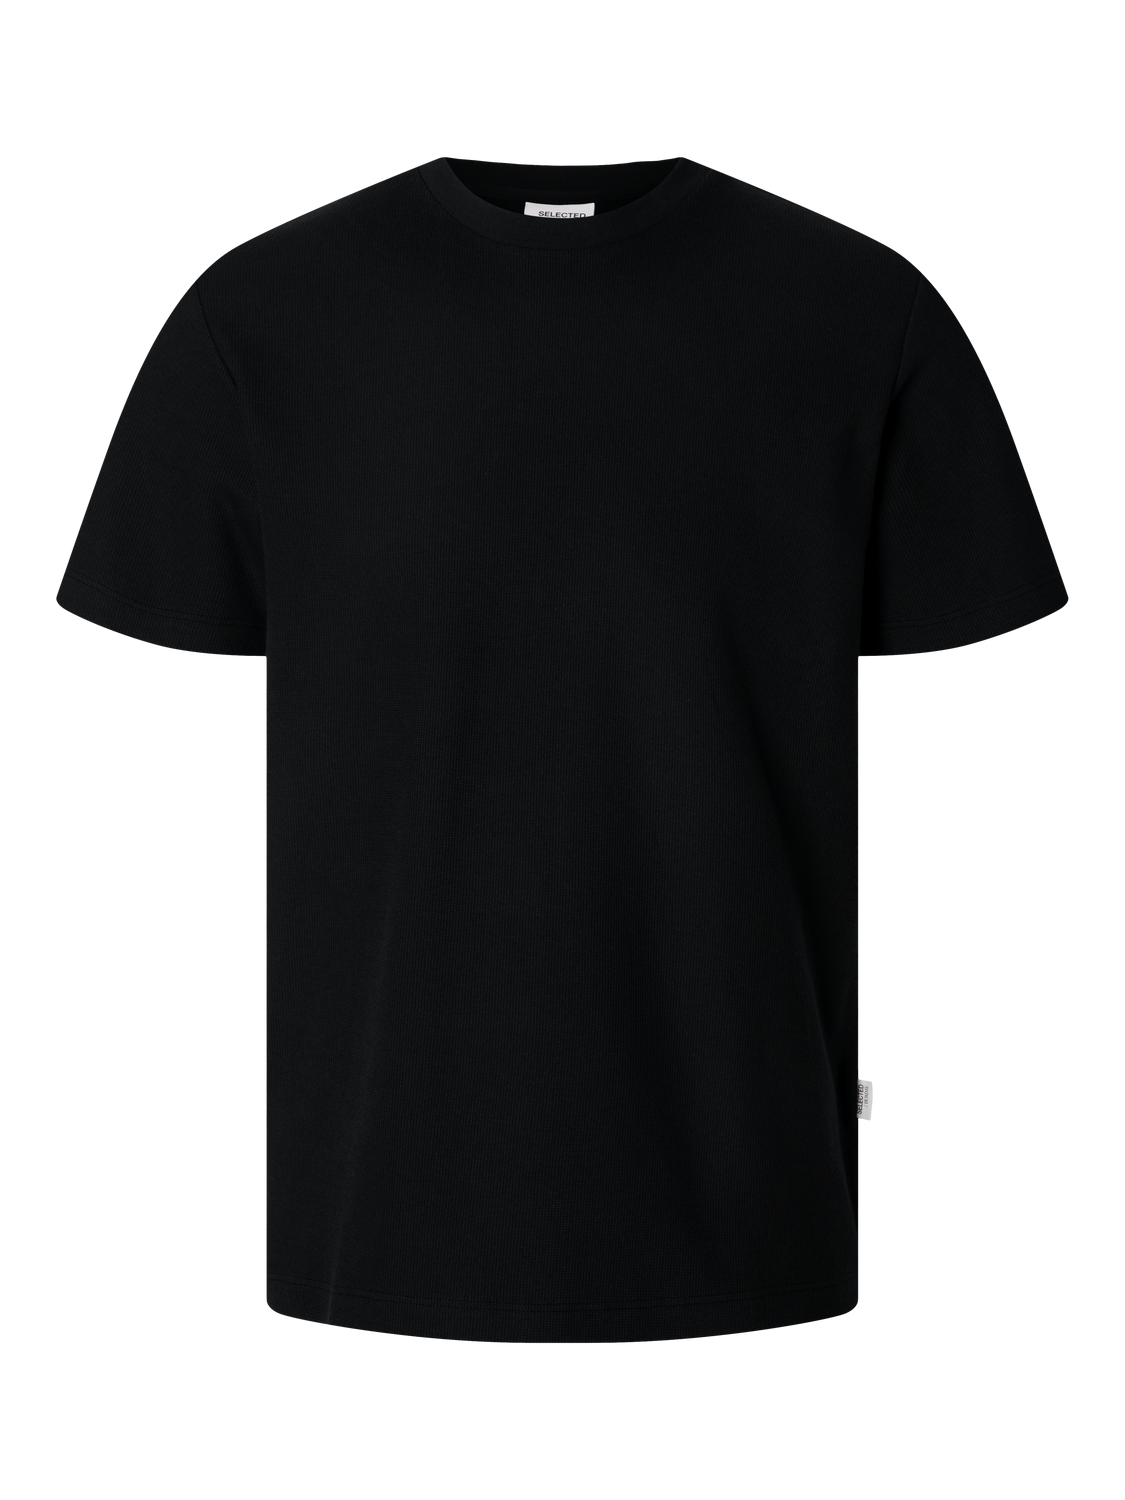 SELECTED HOMME - RELAX WALT WAFFLE T-Shirt - Black